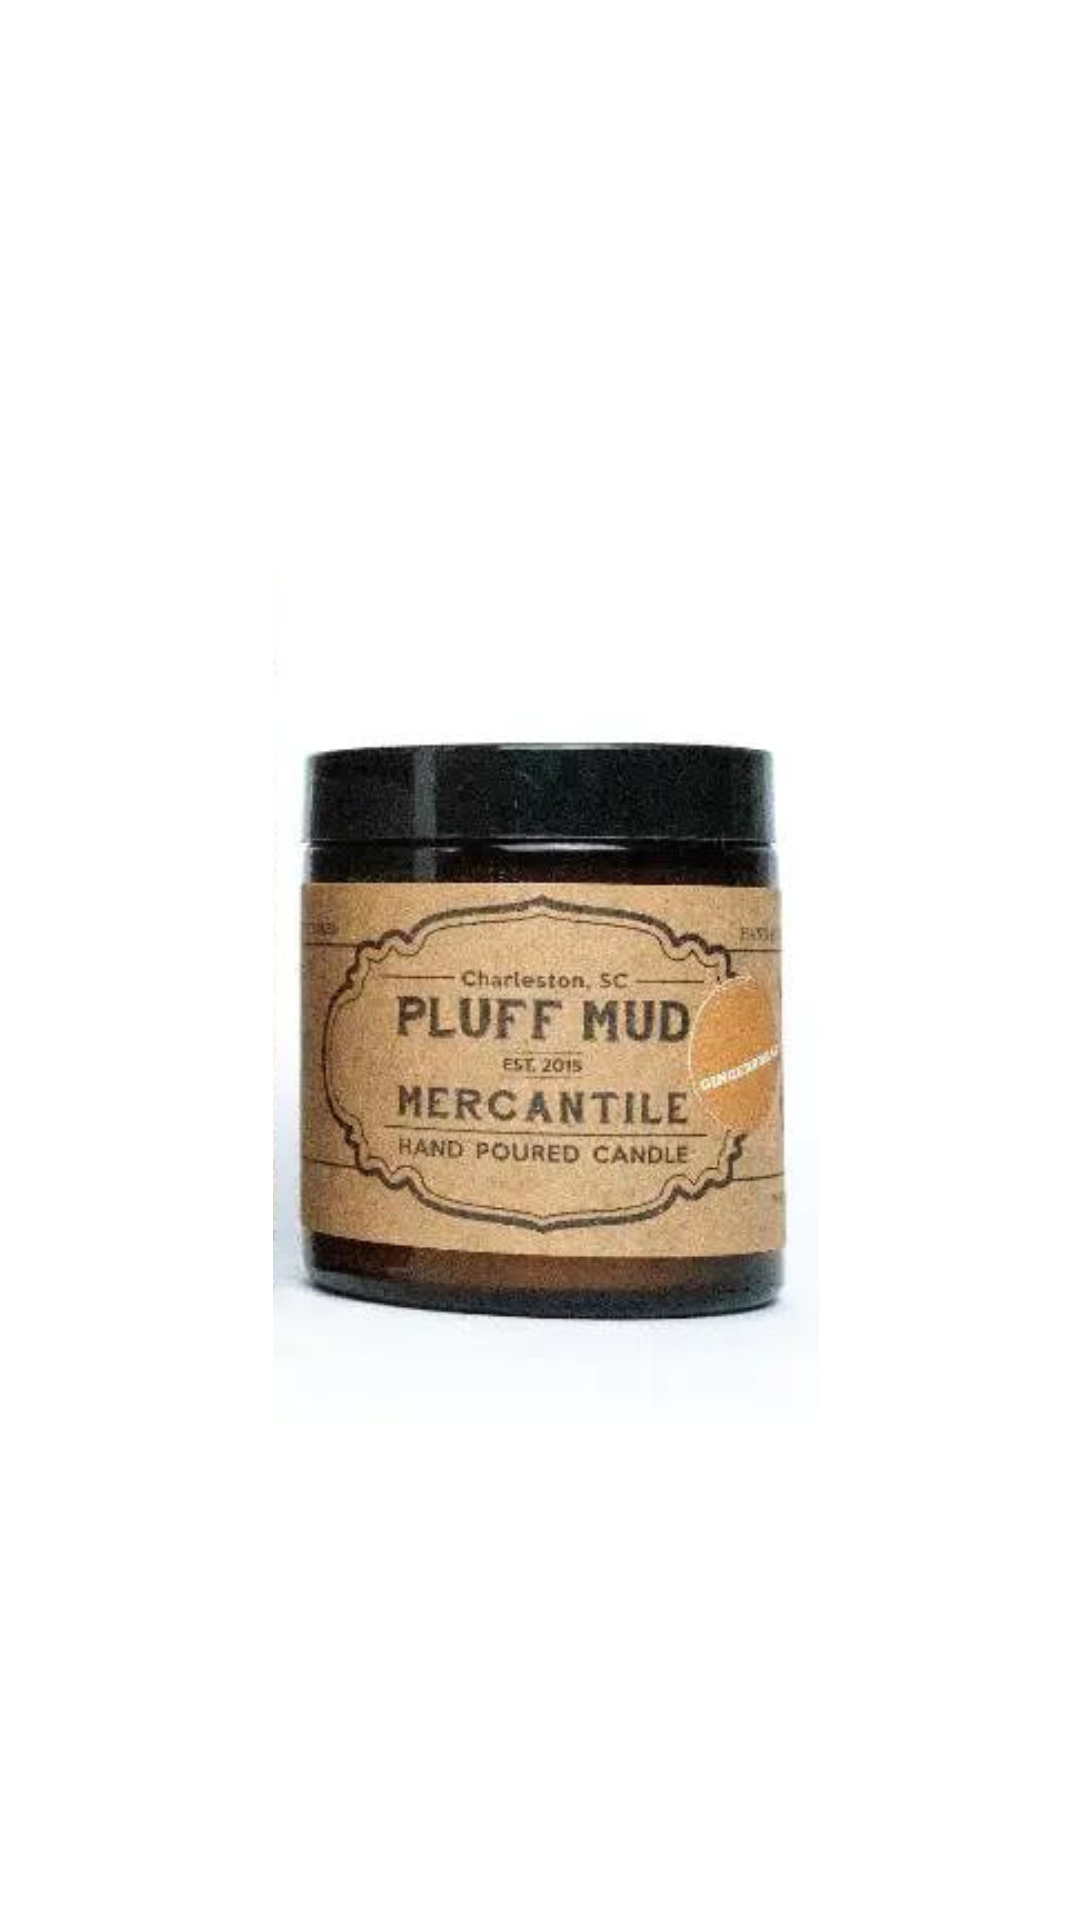 Clean Linen Hand Poured Soy Candle - Pluff Mud Mercantile